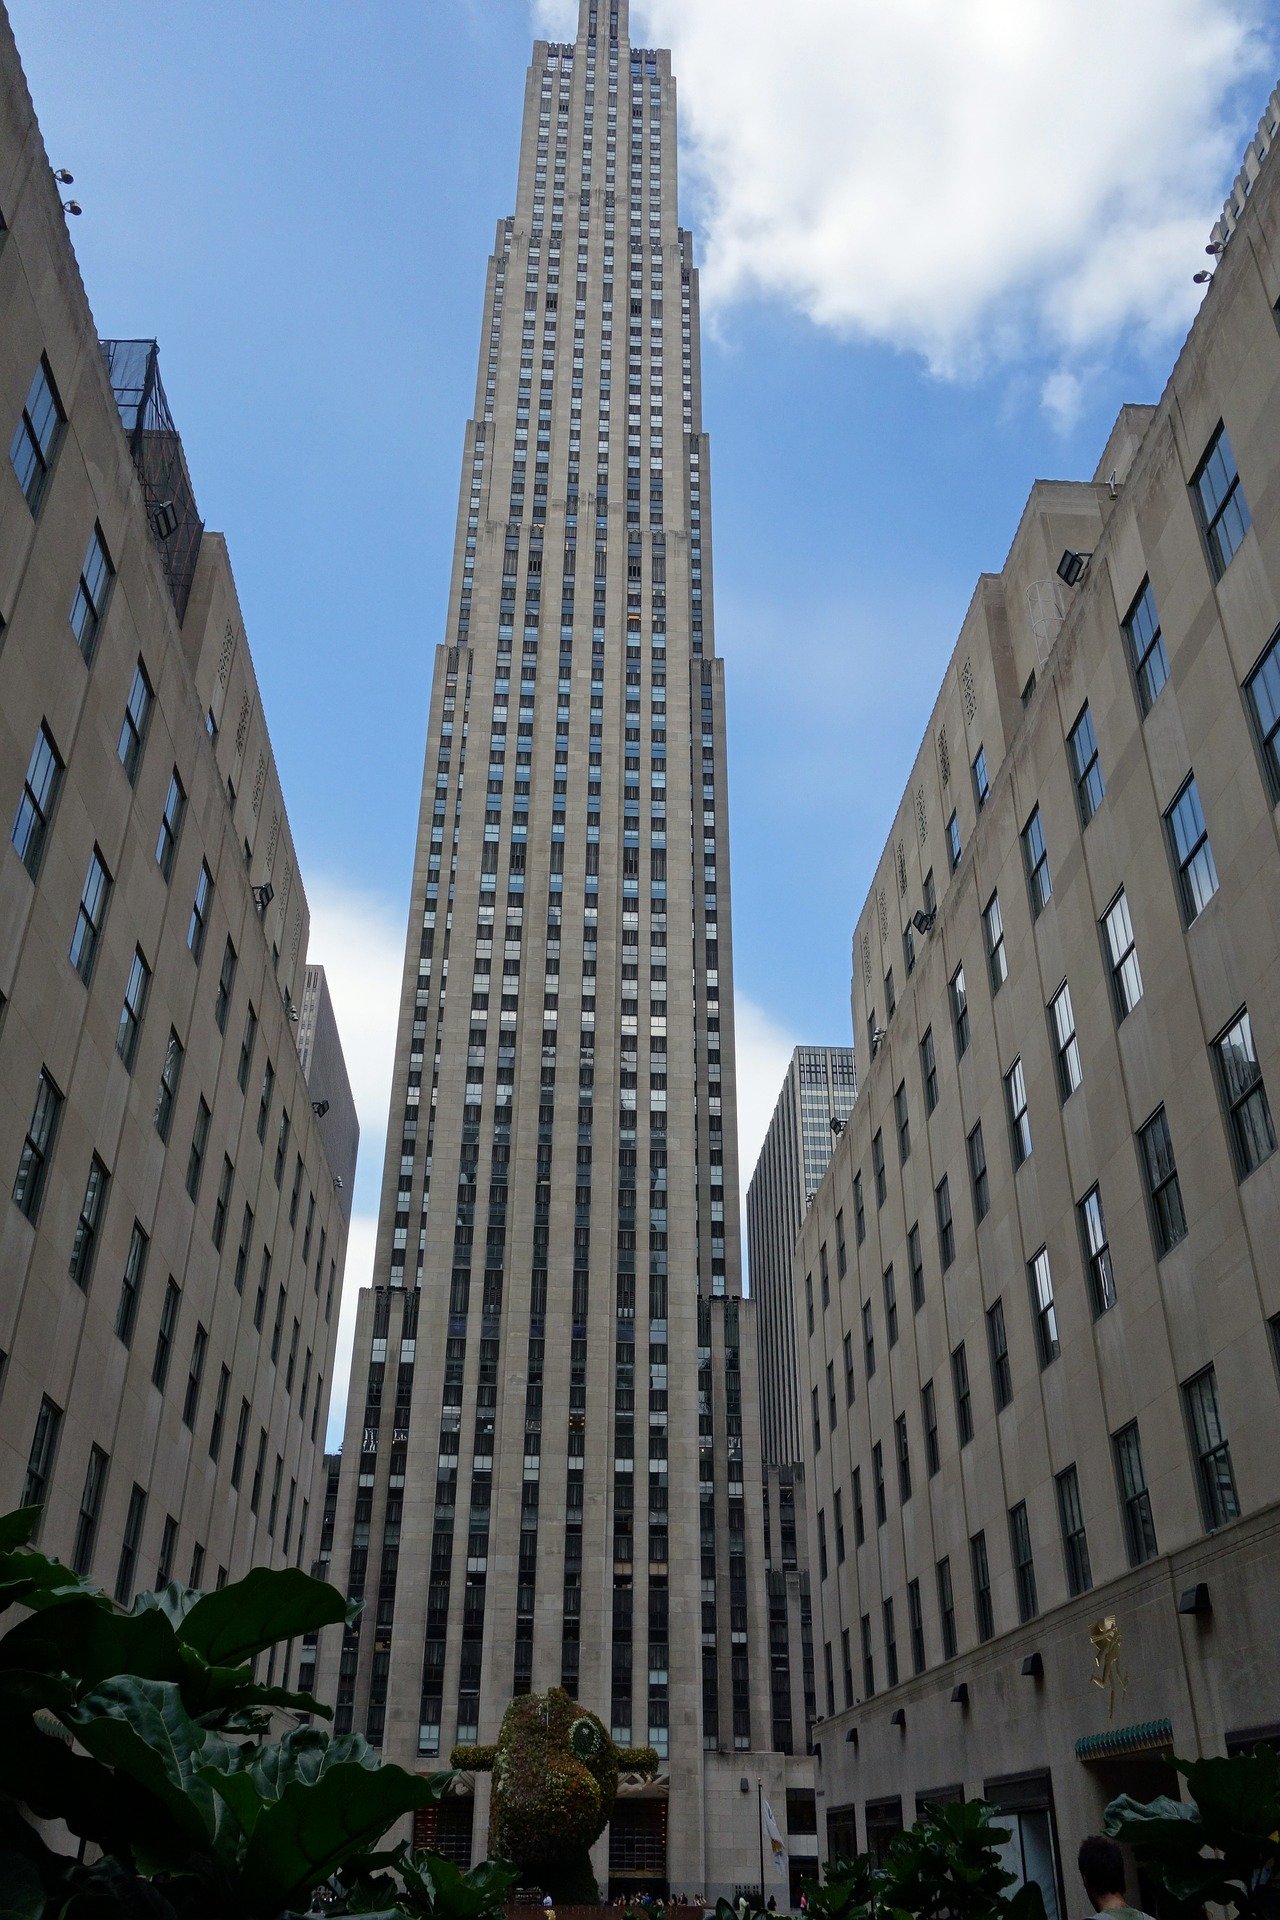 A tall building stands at the Rockefeller Center in New York City. | Photo: Pixabay